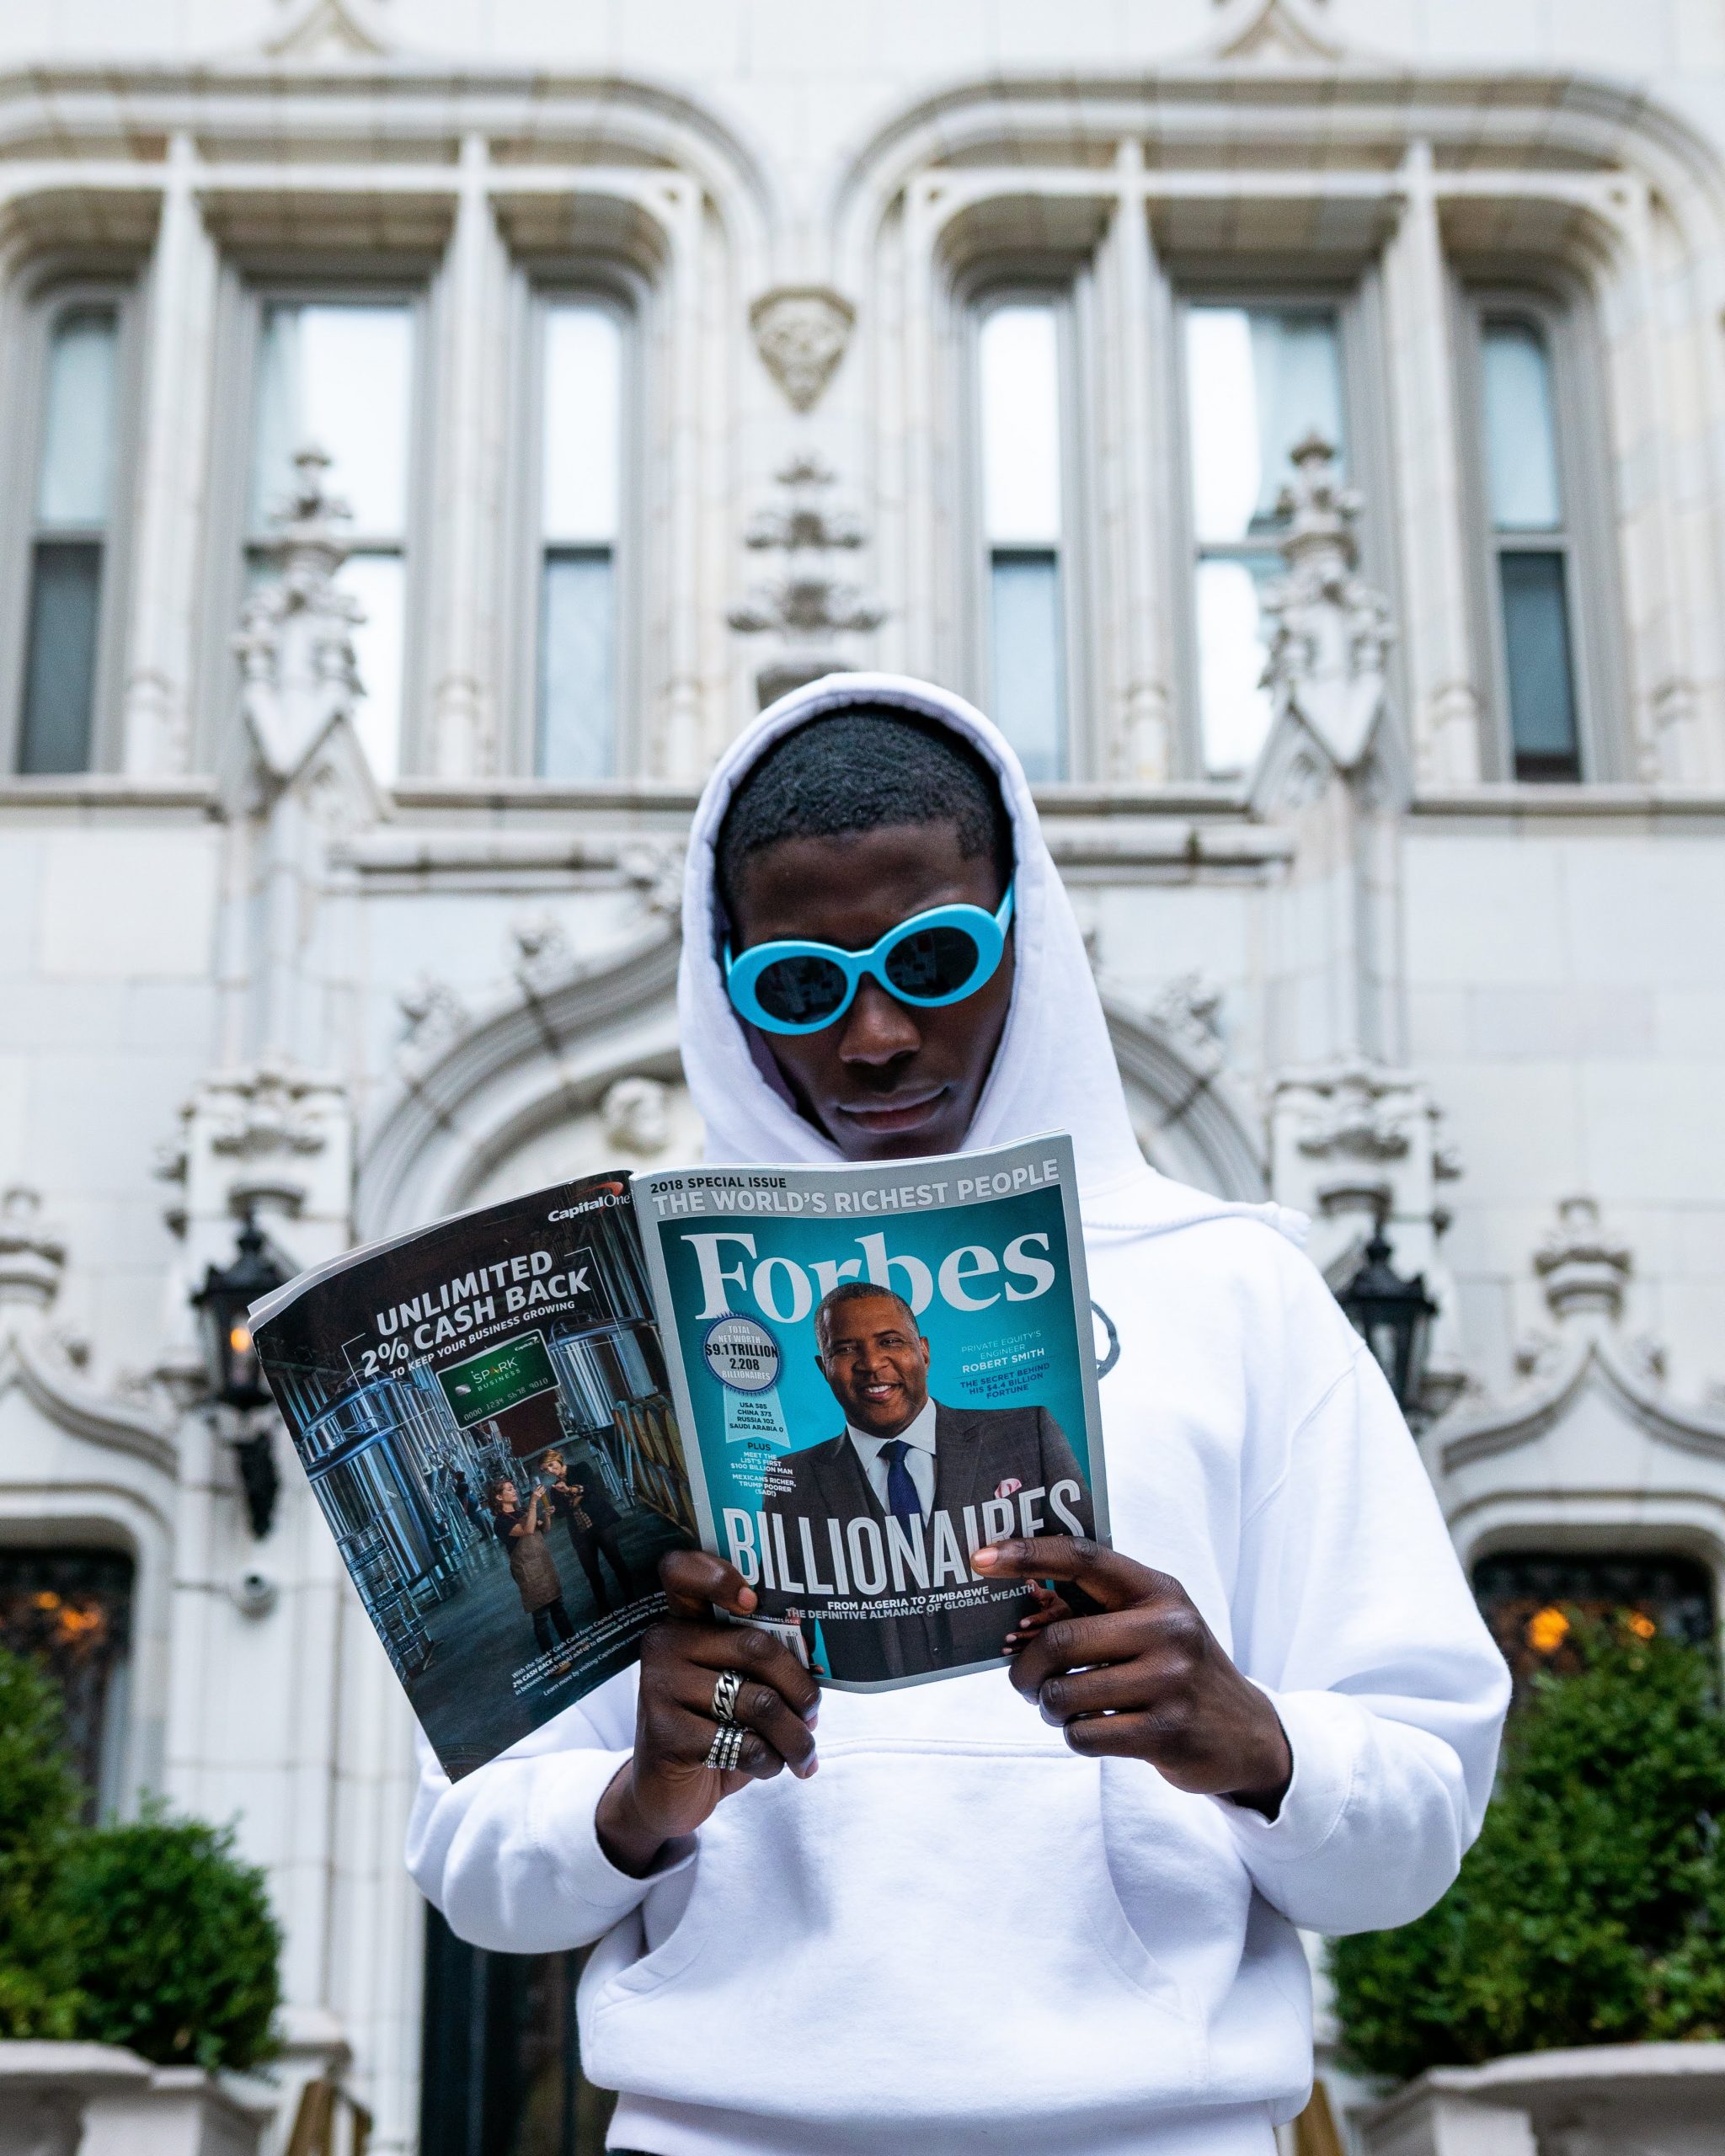 A man reading Forbes magazine, "Billionare" is on the cover with a man in a suit.